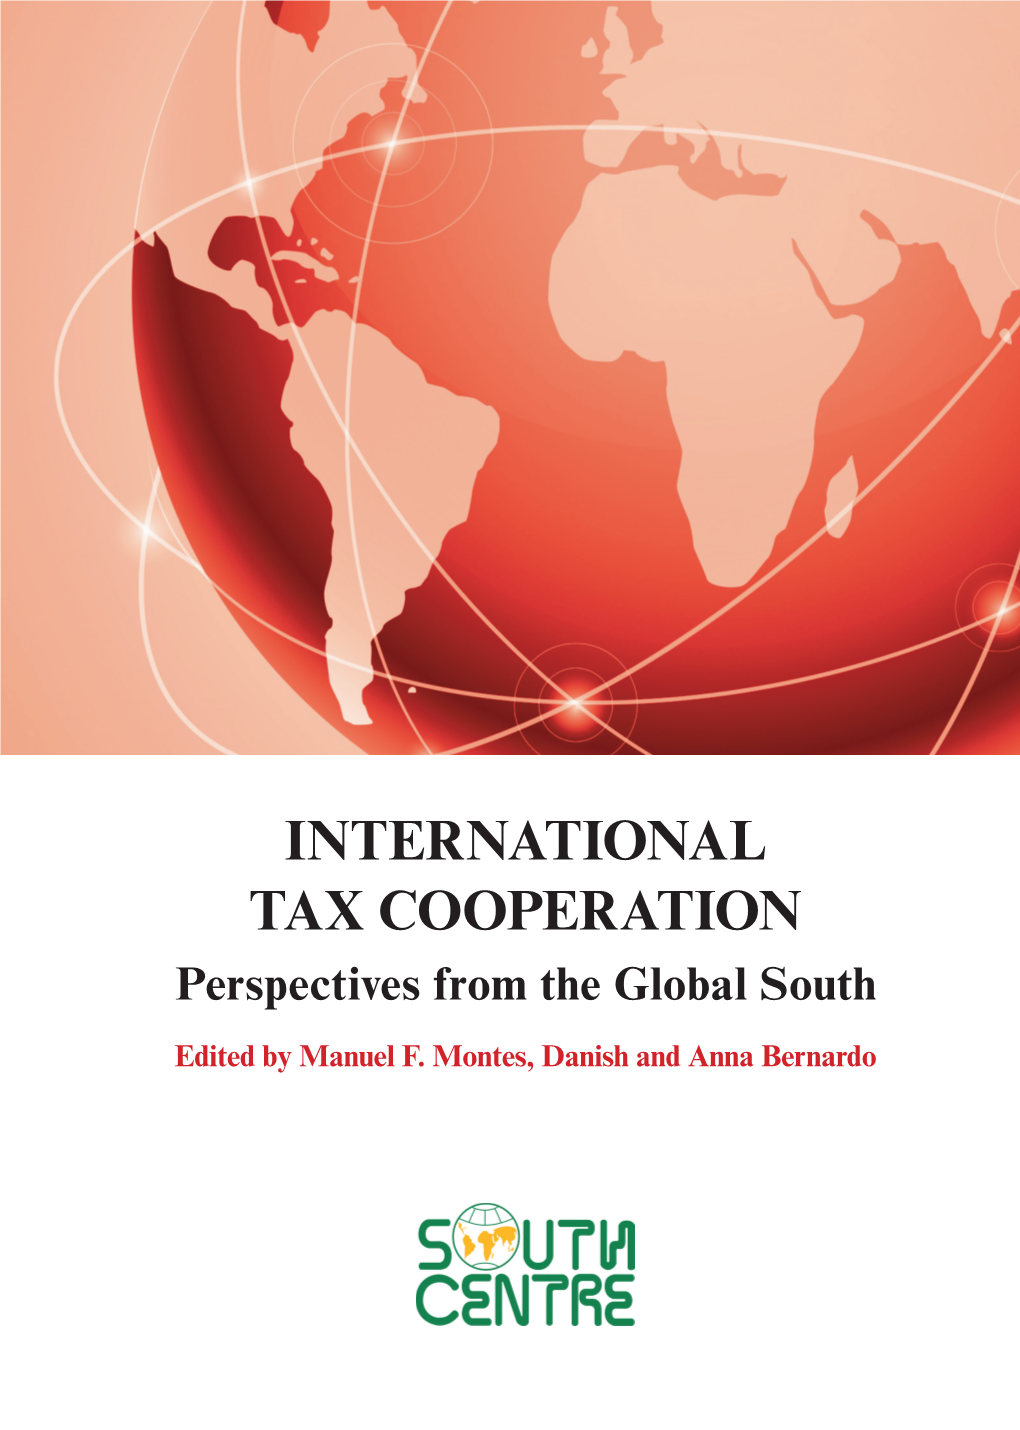 INTERNATIONAL TAX COOPERATION Perspectives from the Global South